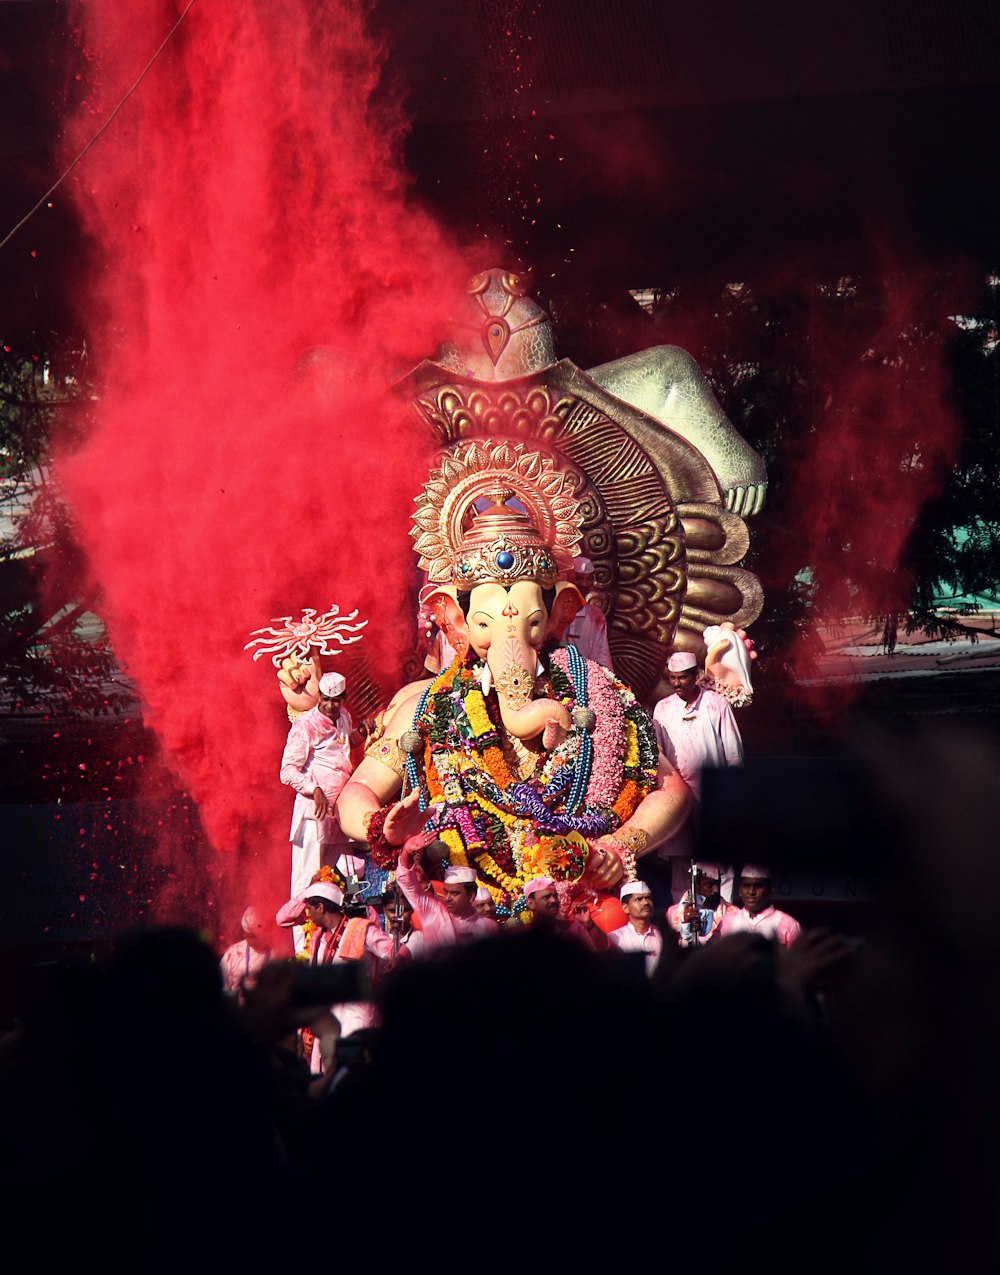 Ganesha statue surrounded by people